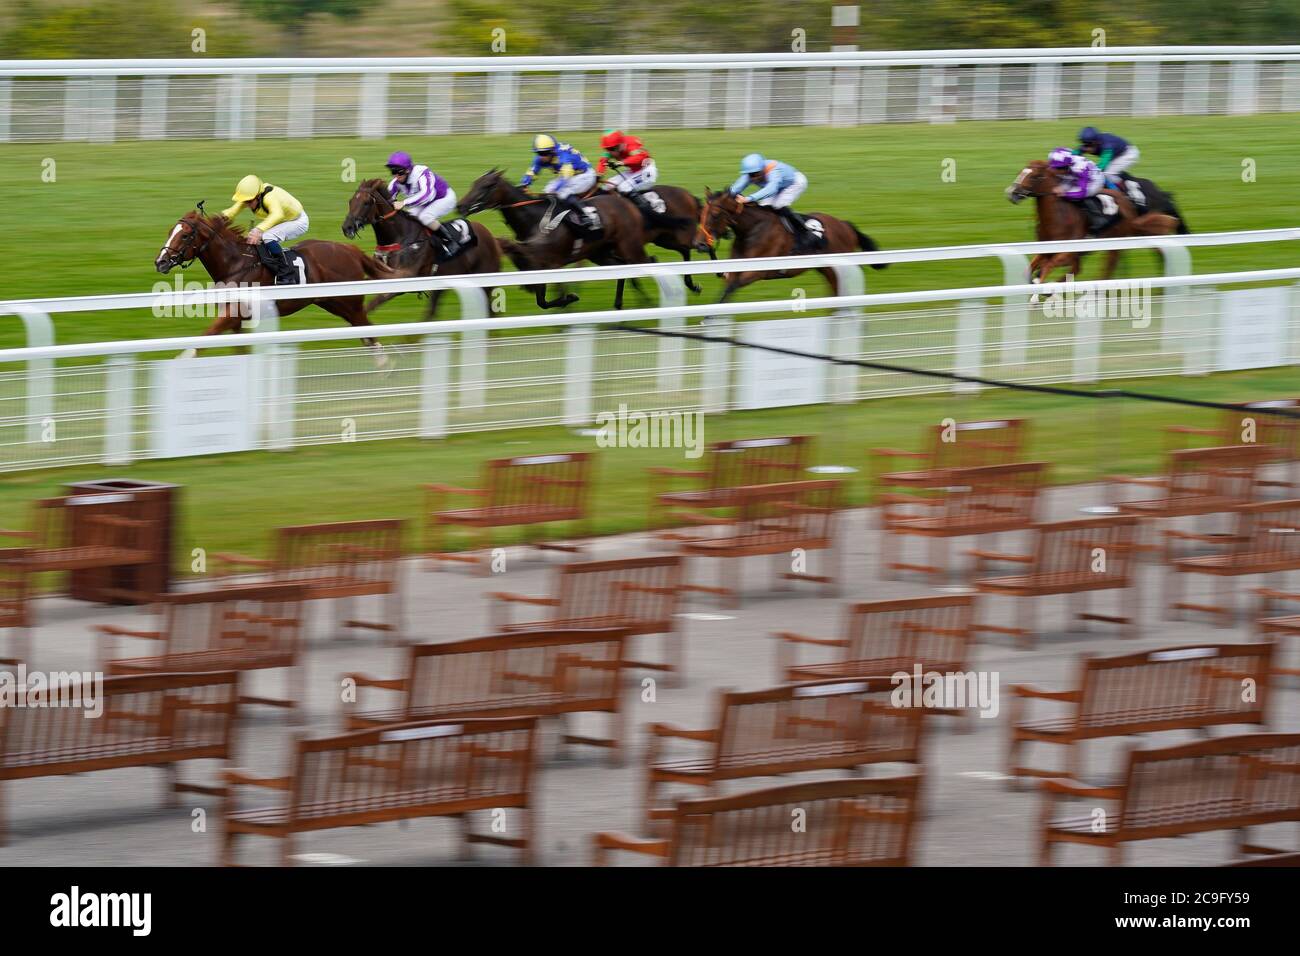 Zamaani ridden by William Buick (left) wins The New Unibet Instant Roulette Nursery during day four of the Goodwood Festival at Goodwood Racecourse, Chichester. Stock Photo